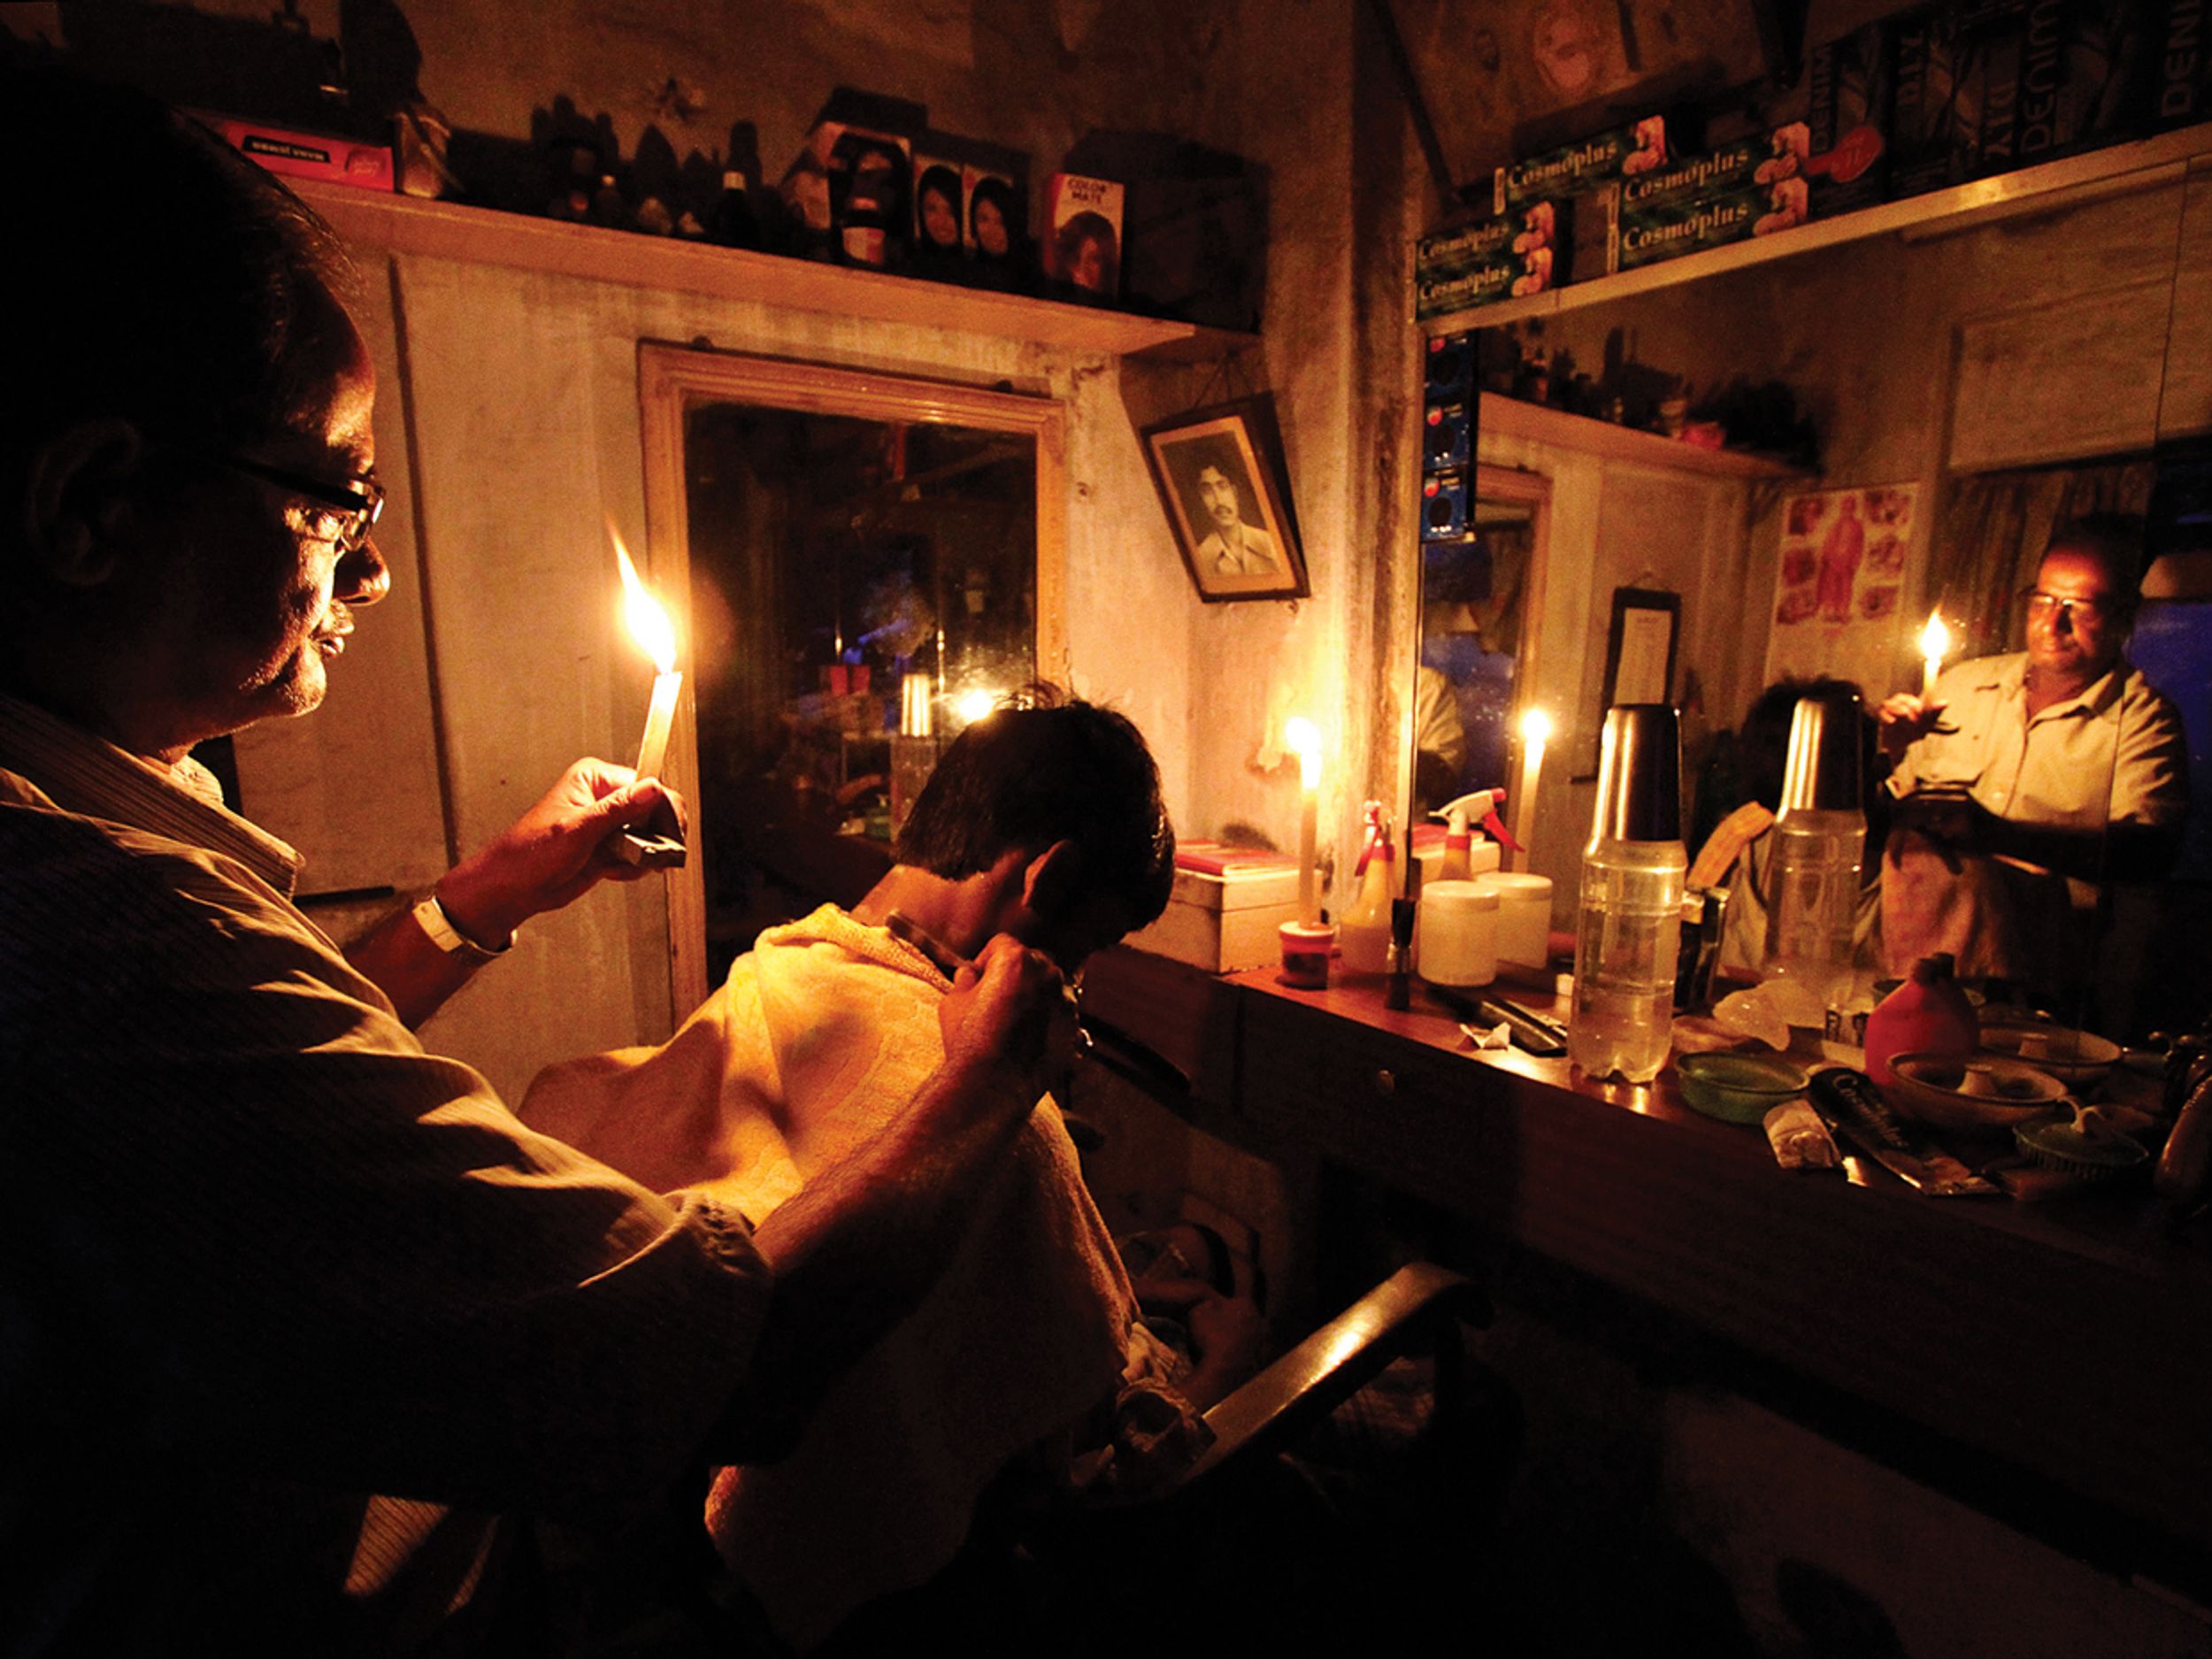 Kolkata cut: Life went on during the biggest blackout in history. This barber in the eastern city of Kolkata worked by candlelight.